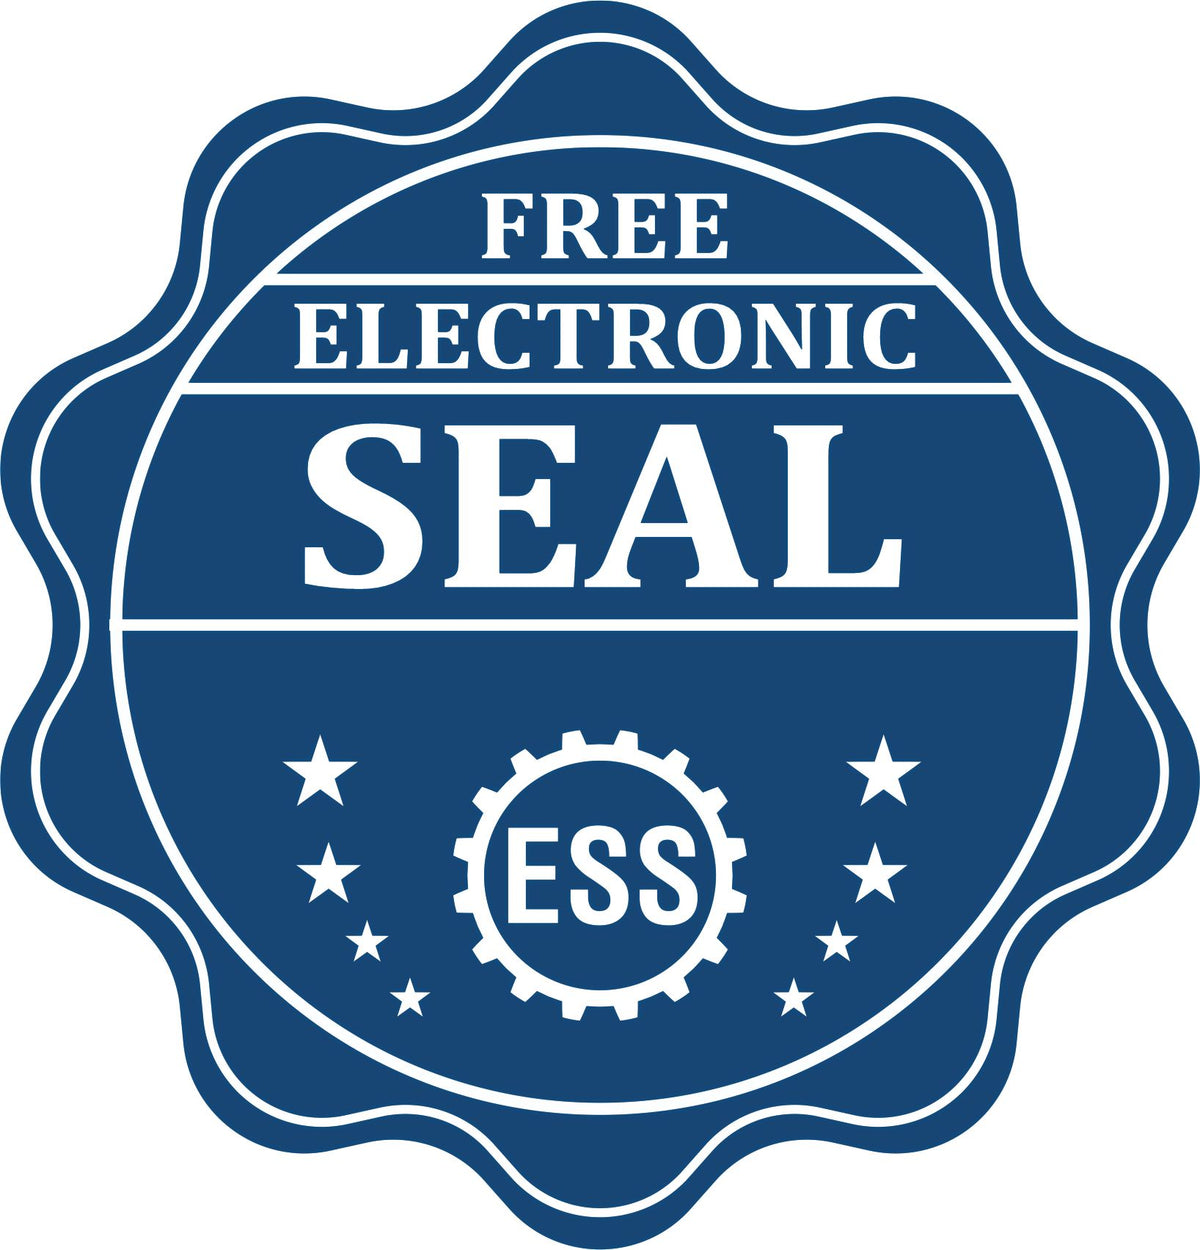 A badge showing a free electronic seal for the Handheld Vermont Professional Geologist Embosser with stars and the ESS gear on the emblem.